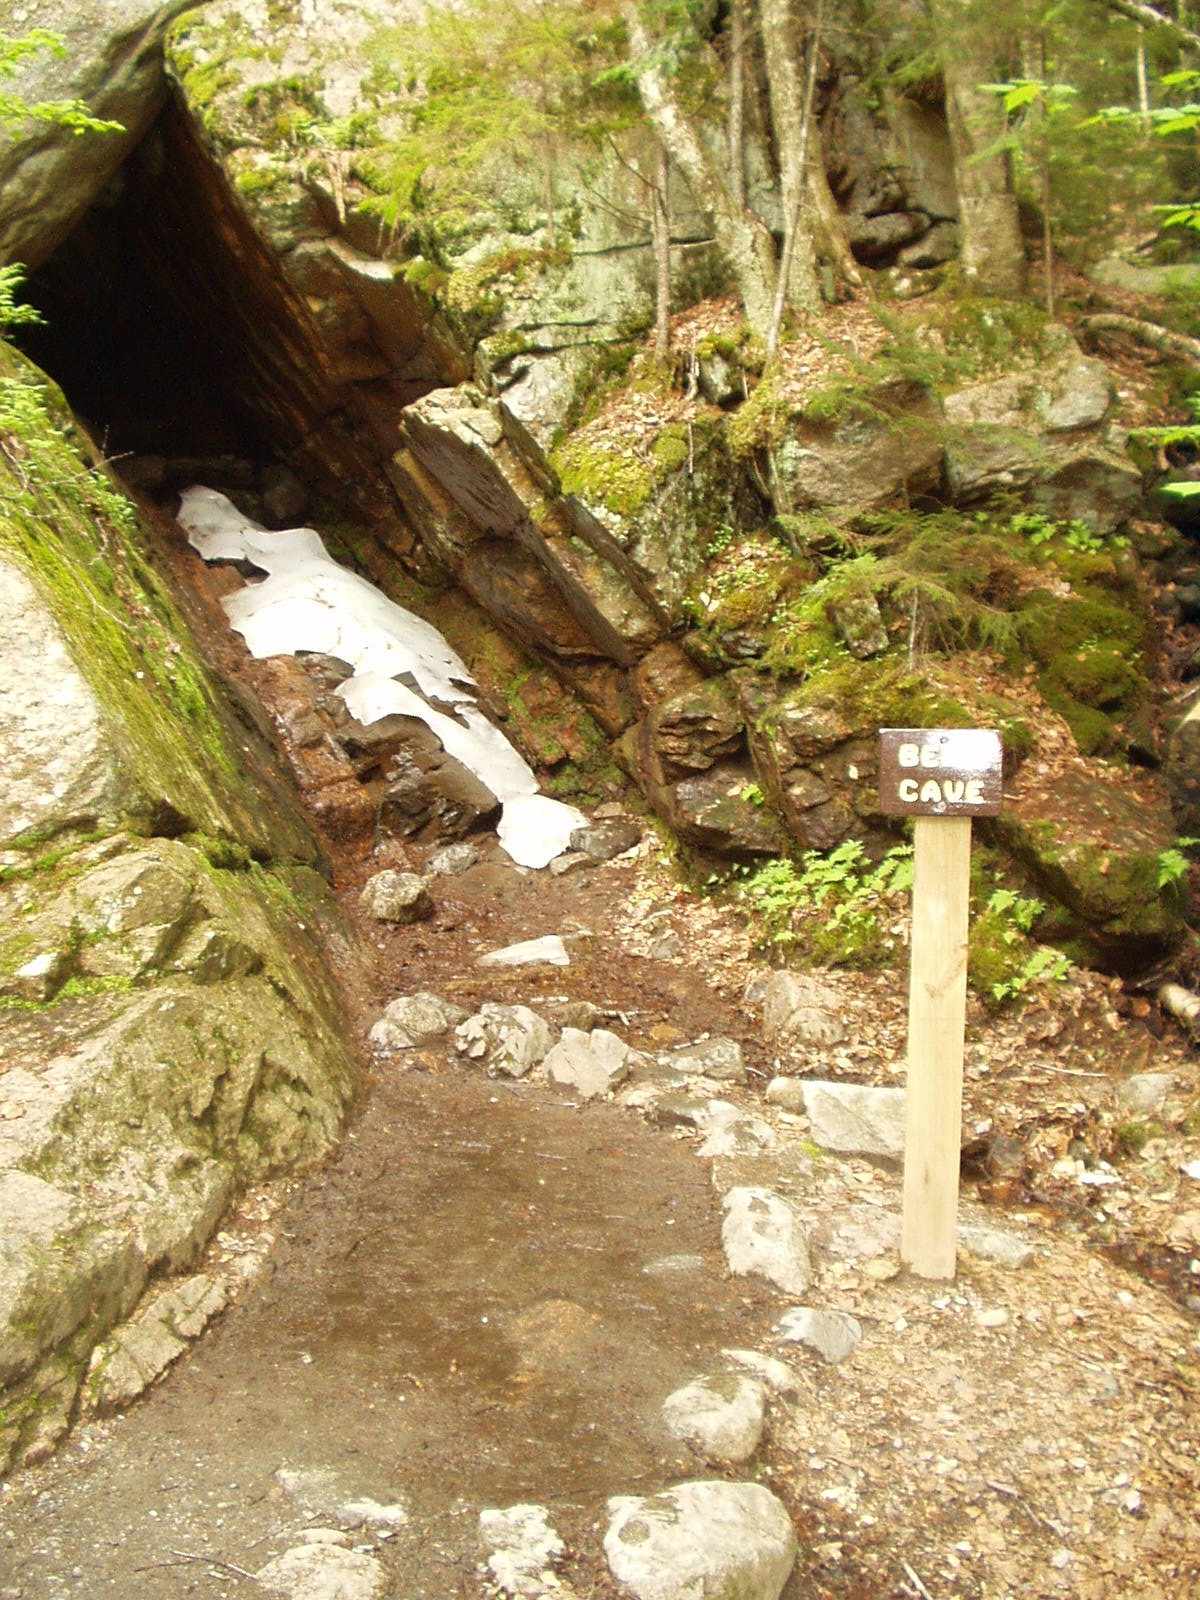 Snow in the Bear Cave at the Flume - in May!